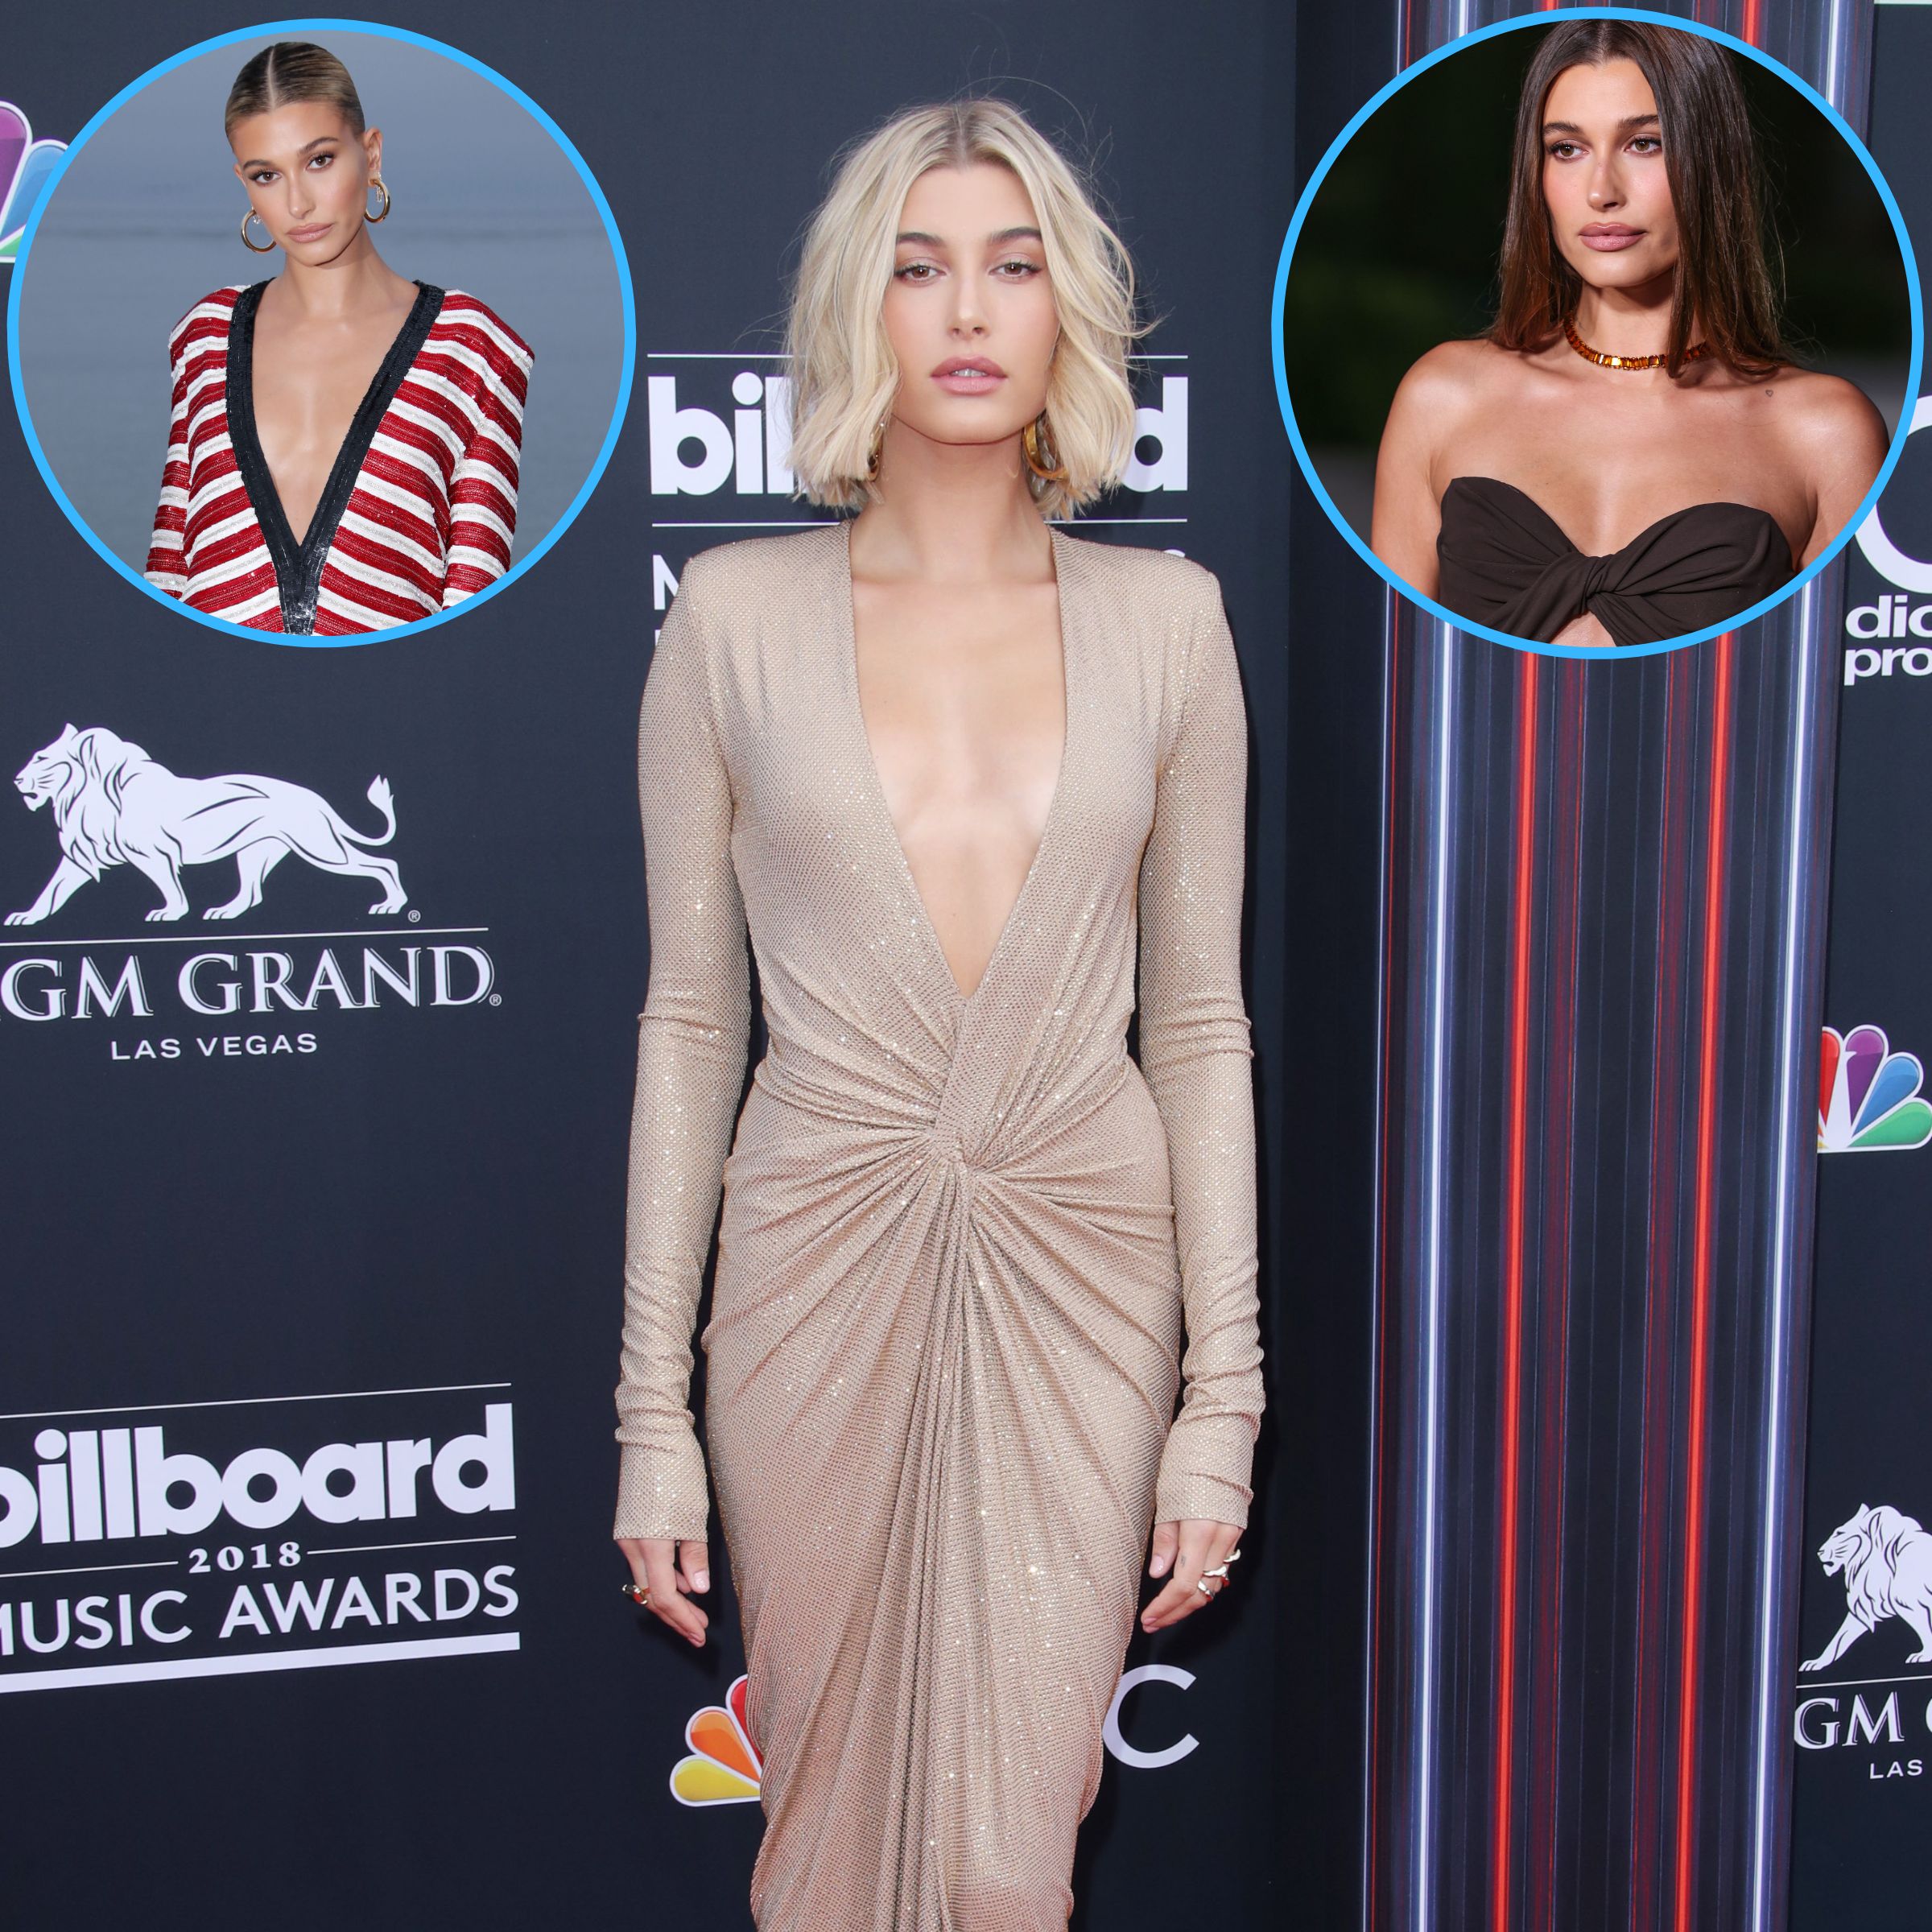 Hailey Bieber Braless Pictures: Photos of Model Not Wearing a Bra